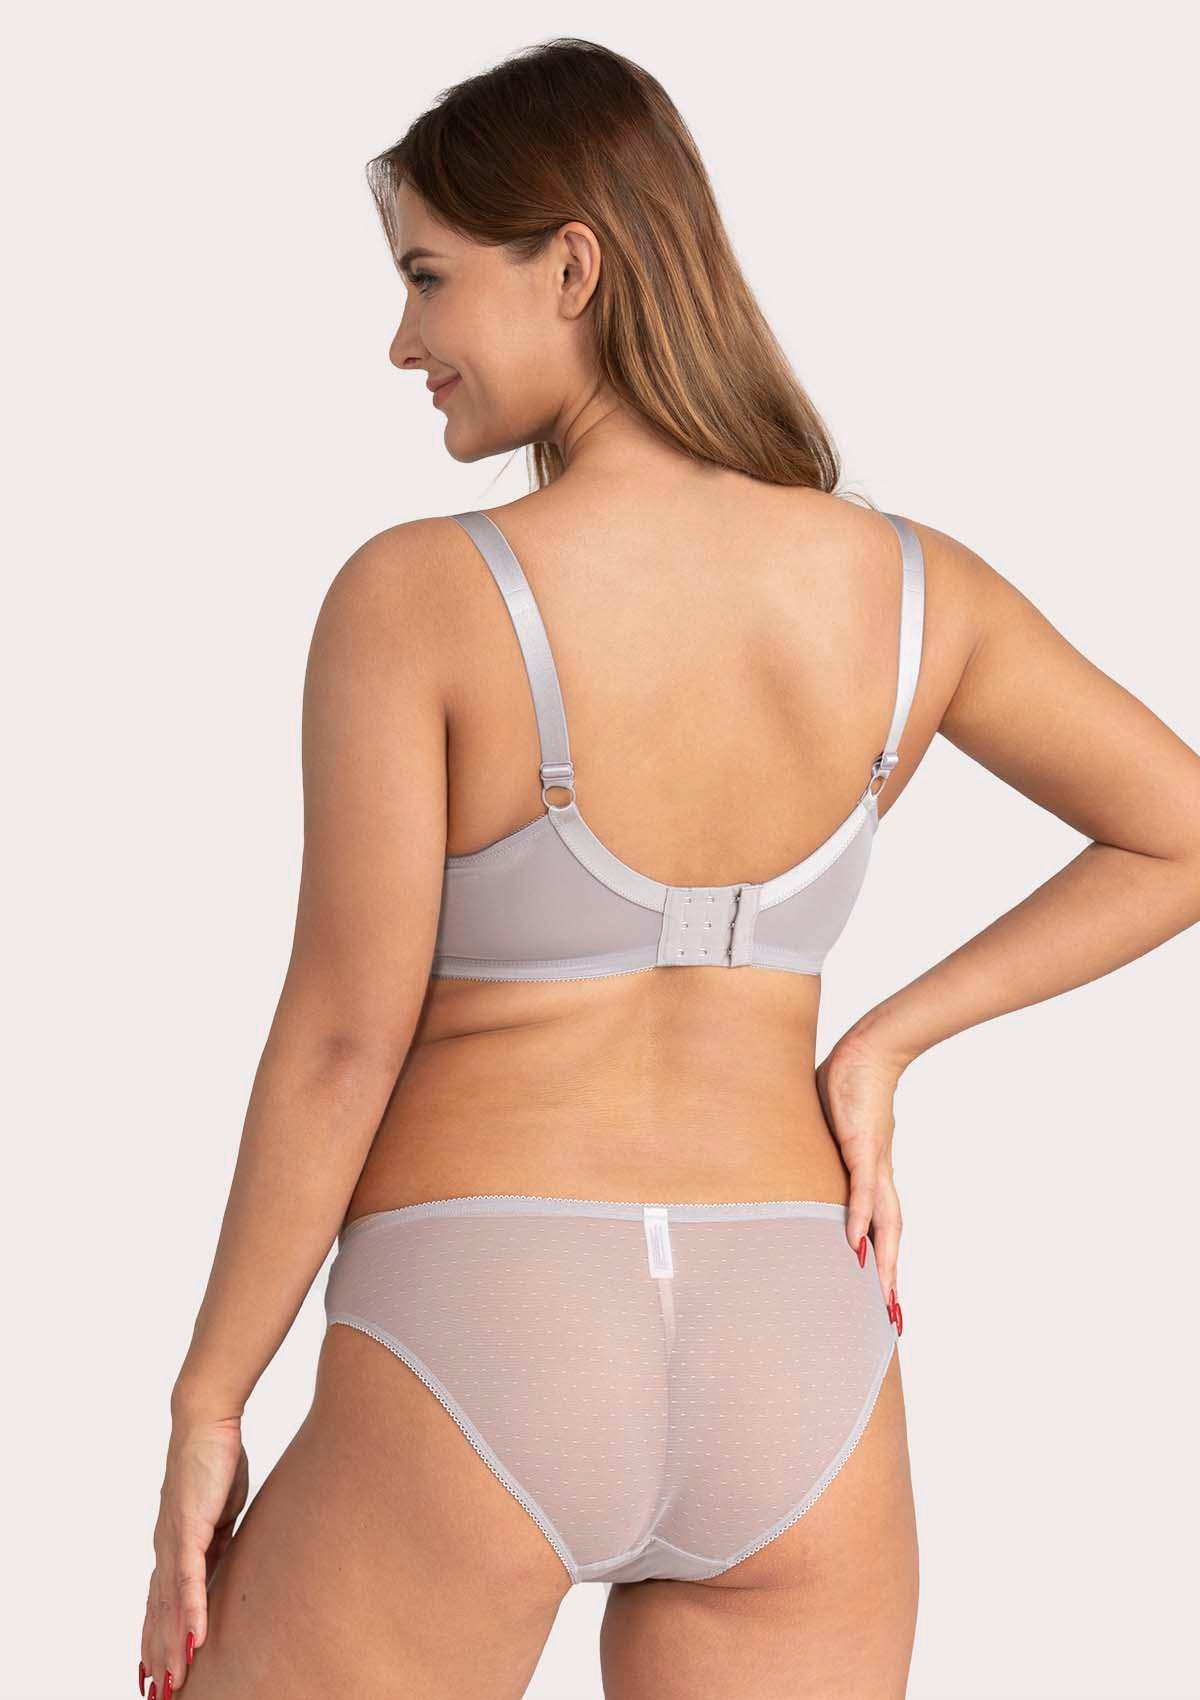 HSIA Enchante Lace Bra And Panties Set: Back Support Bra For Posture - Light Gray / 34 / D